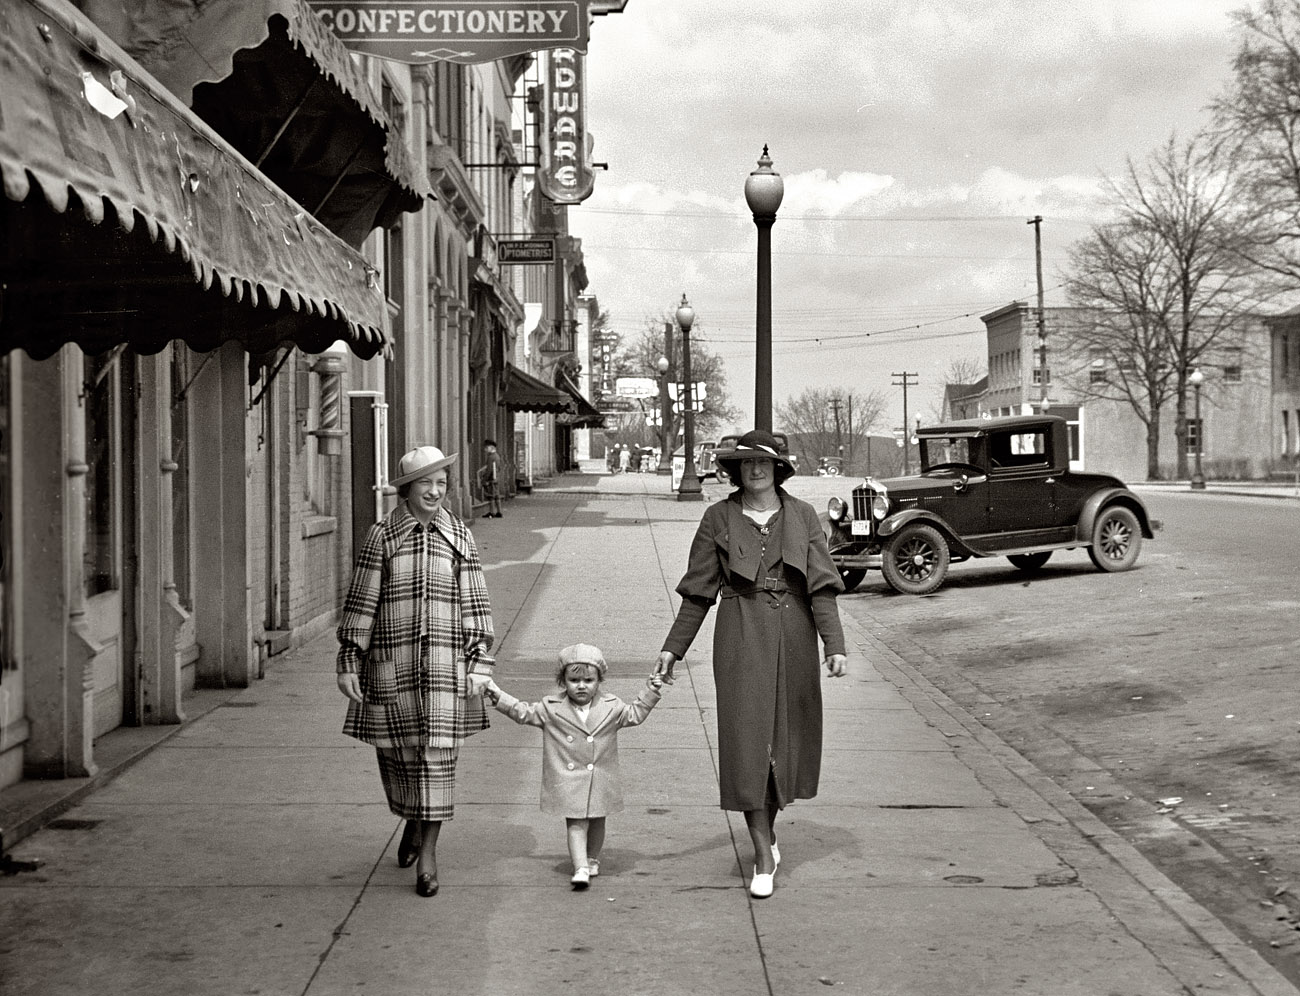 April 1936. Three ladies out and about in Jackson, Ohio. View full size. 35mm nitrate negative by Theodor Jung for the Farm Security Administration.